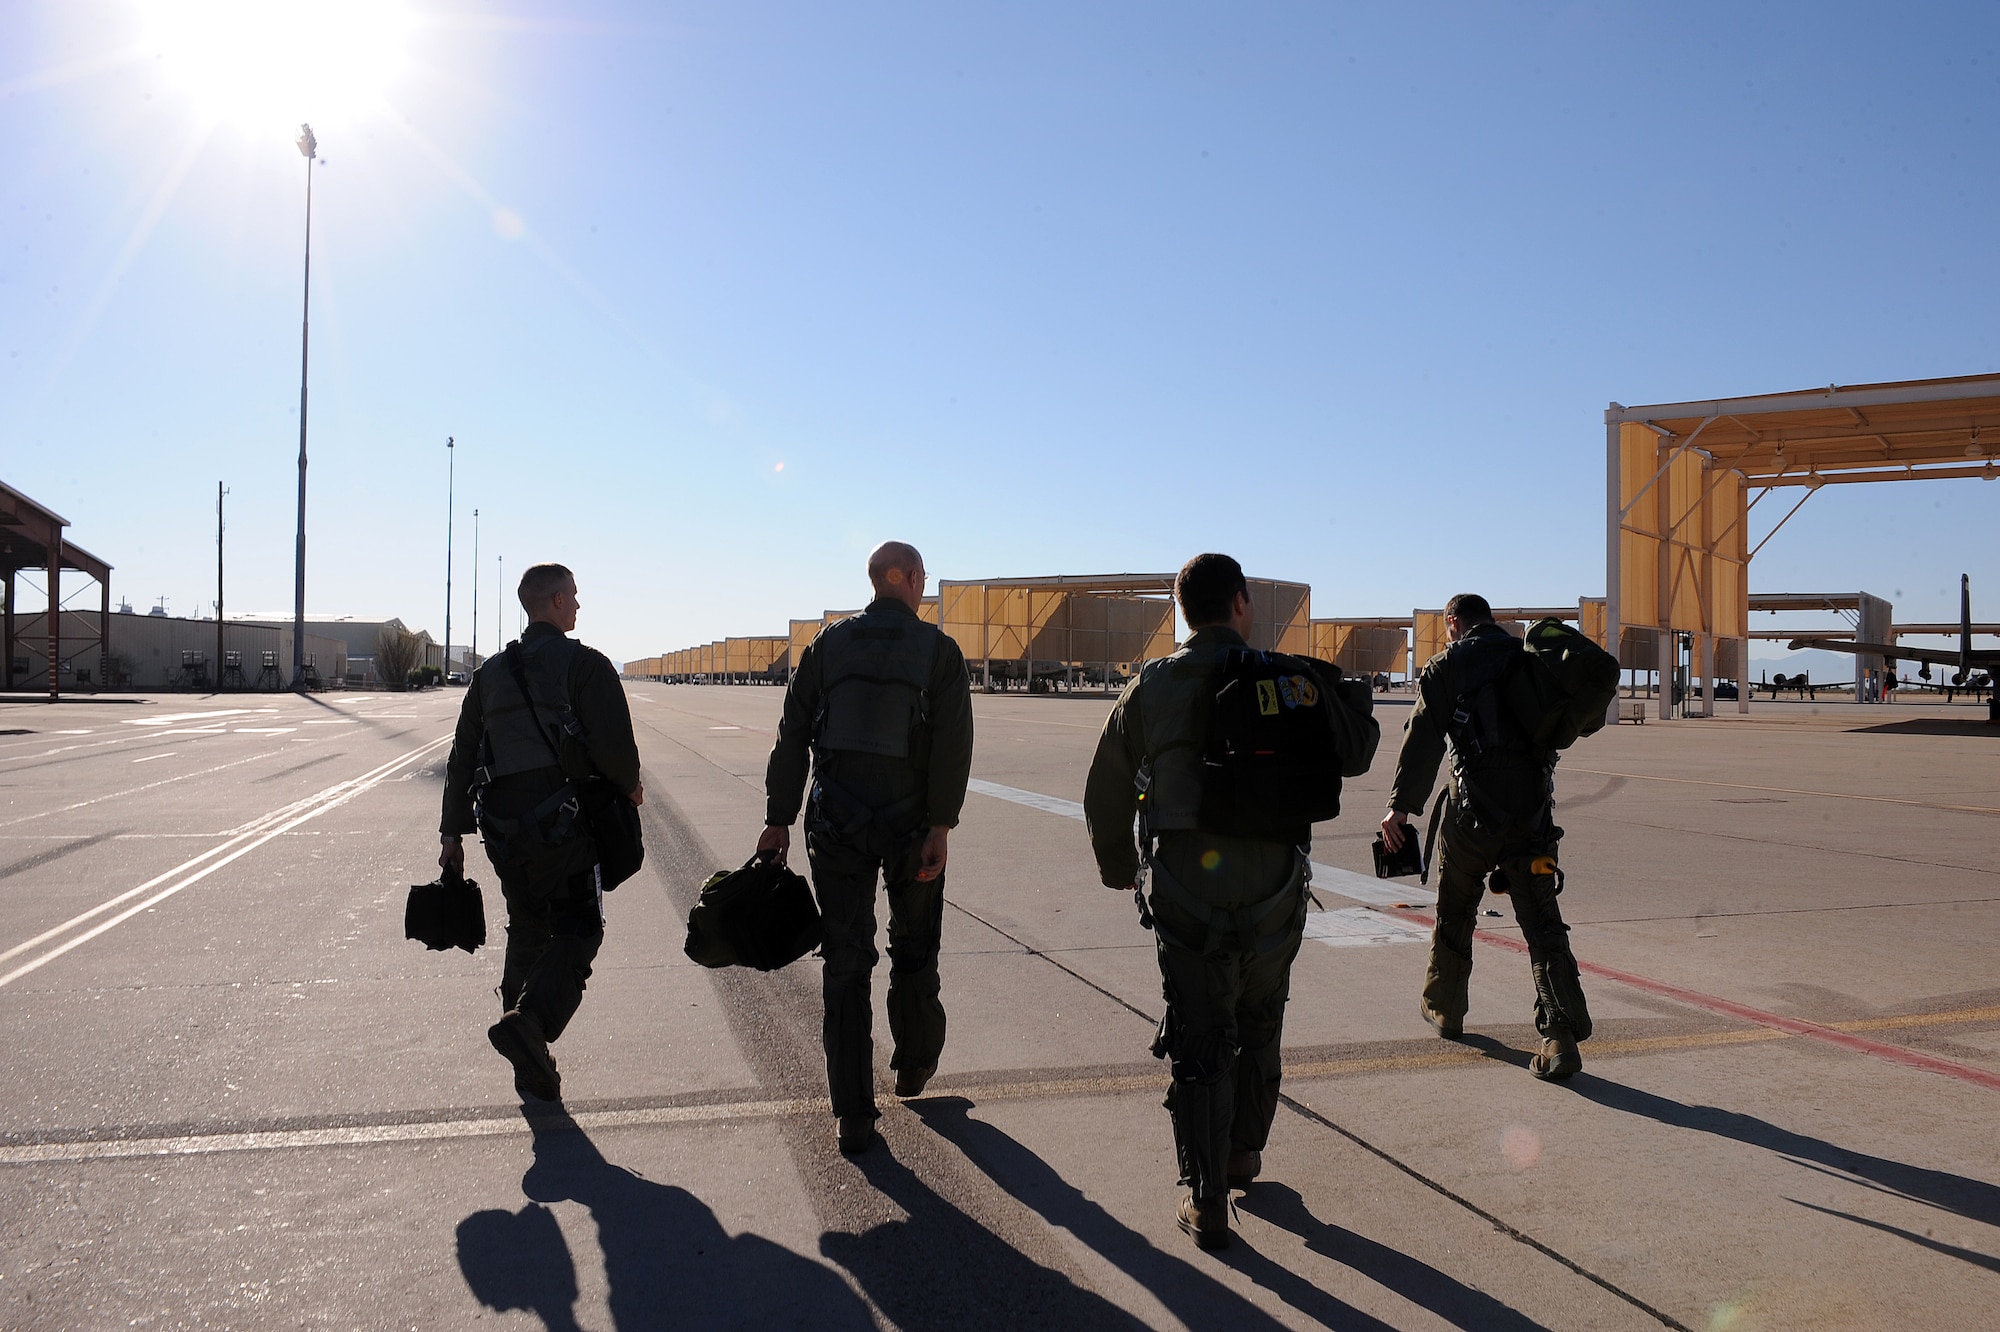 U.S. Air Force Airmen from the 357th Fighter Squadron walk to their aircraft on Davis-Monthan Air Force Base, Ariz., Nov. 7, 2012. The 357th FS student pilot training takes six months to complete. (U.S. Air Force photo by Airman 1st Class Christine Griffiths/Released)